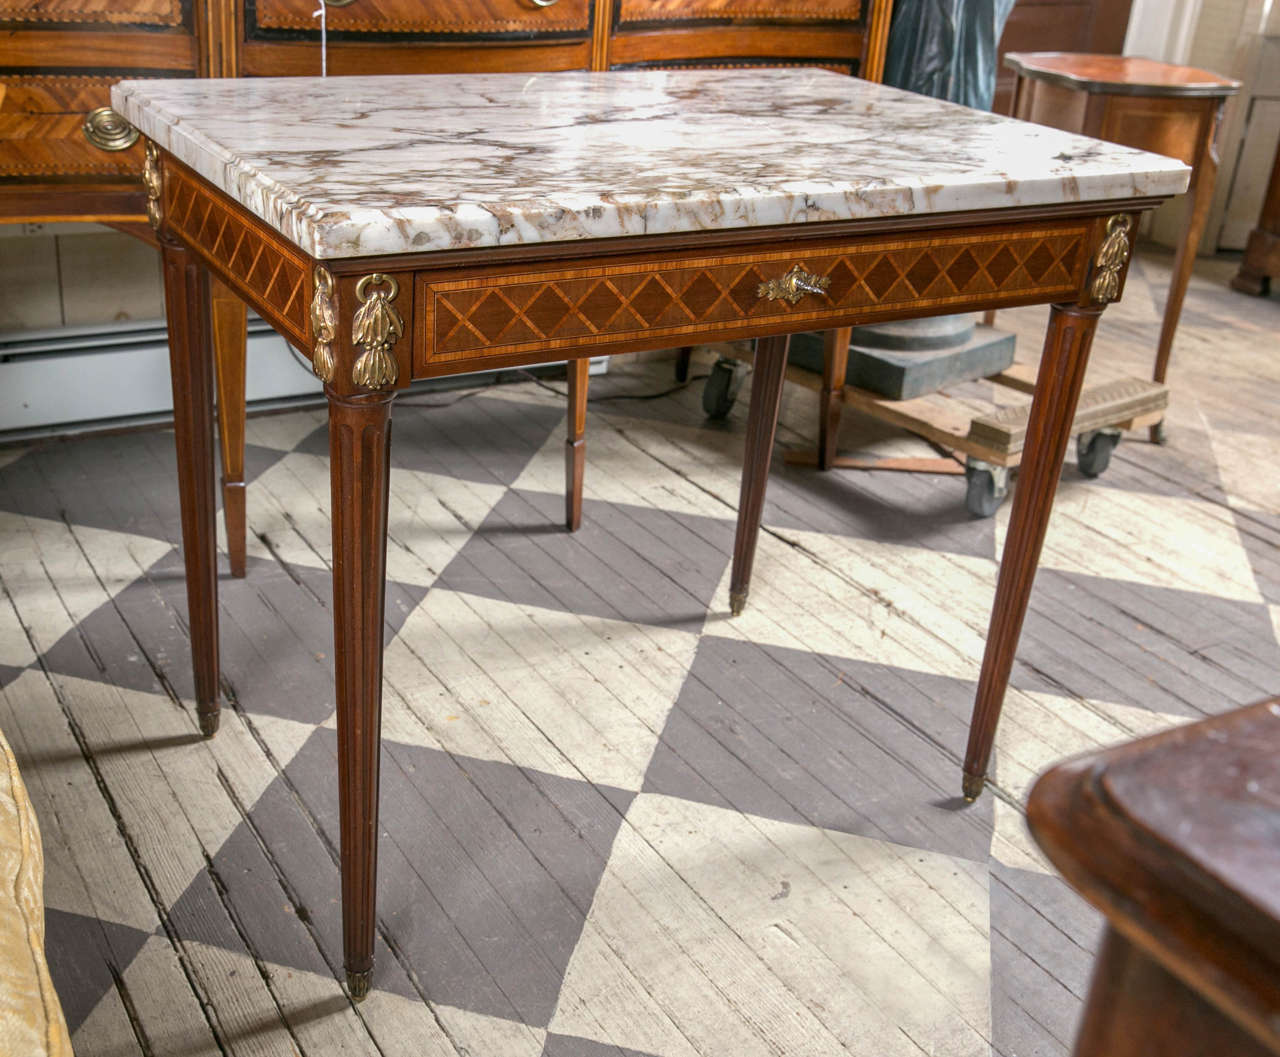 Cove edge marble over a marquetry in laid base, with one drawer. Marquetry of what appears to be mahogany, sycamore and satinwood. Gilt bronze mounts at each corner and escutcheon. Gilt bronze capped feet. Fluted legs.